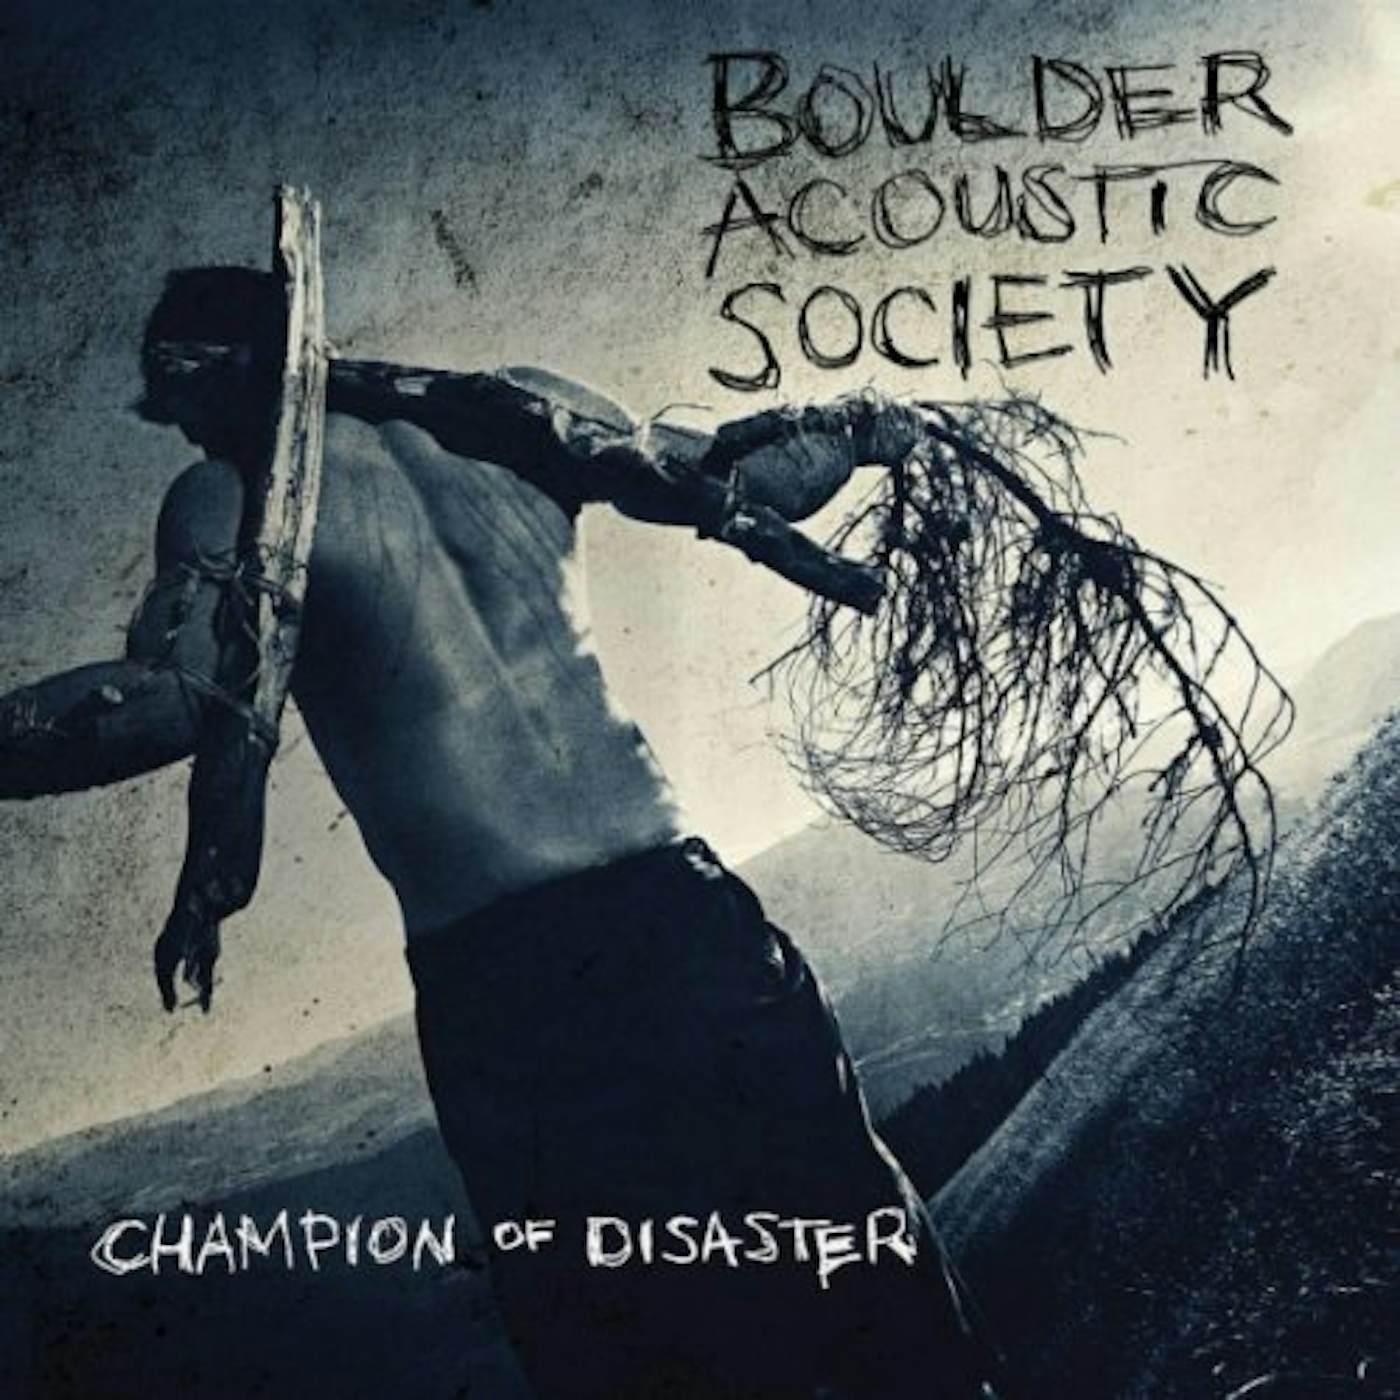 Boulder Acoustic Society CHAMPION OF DISASTER CD